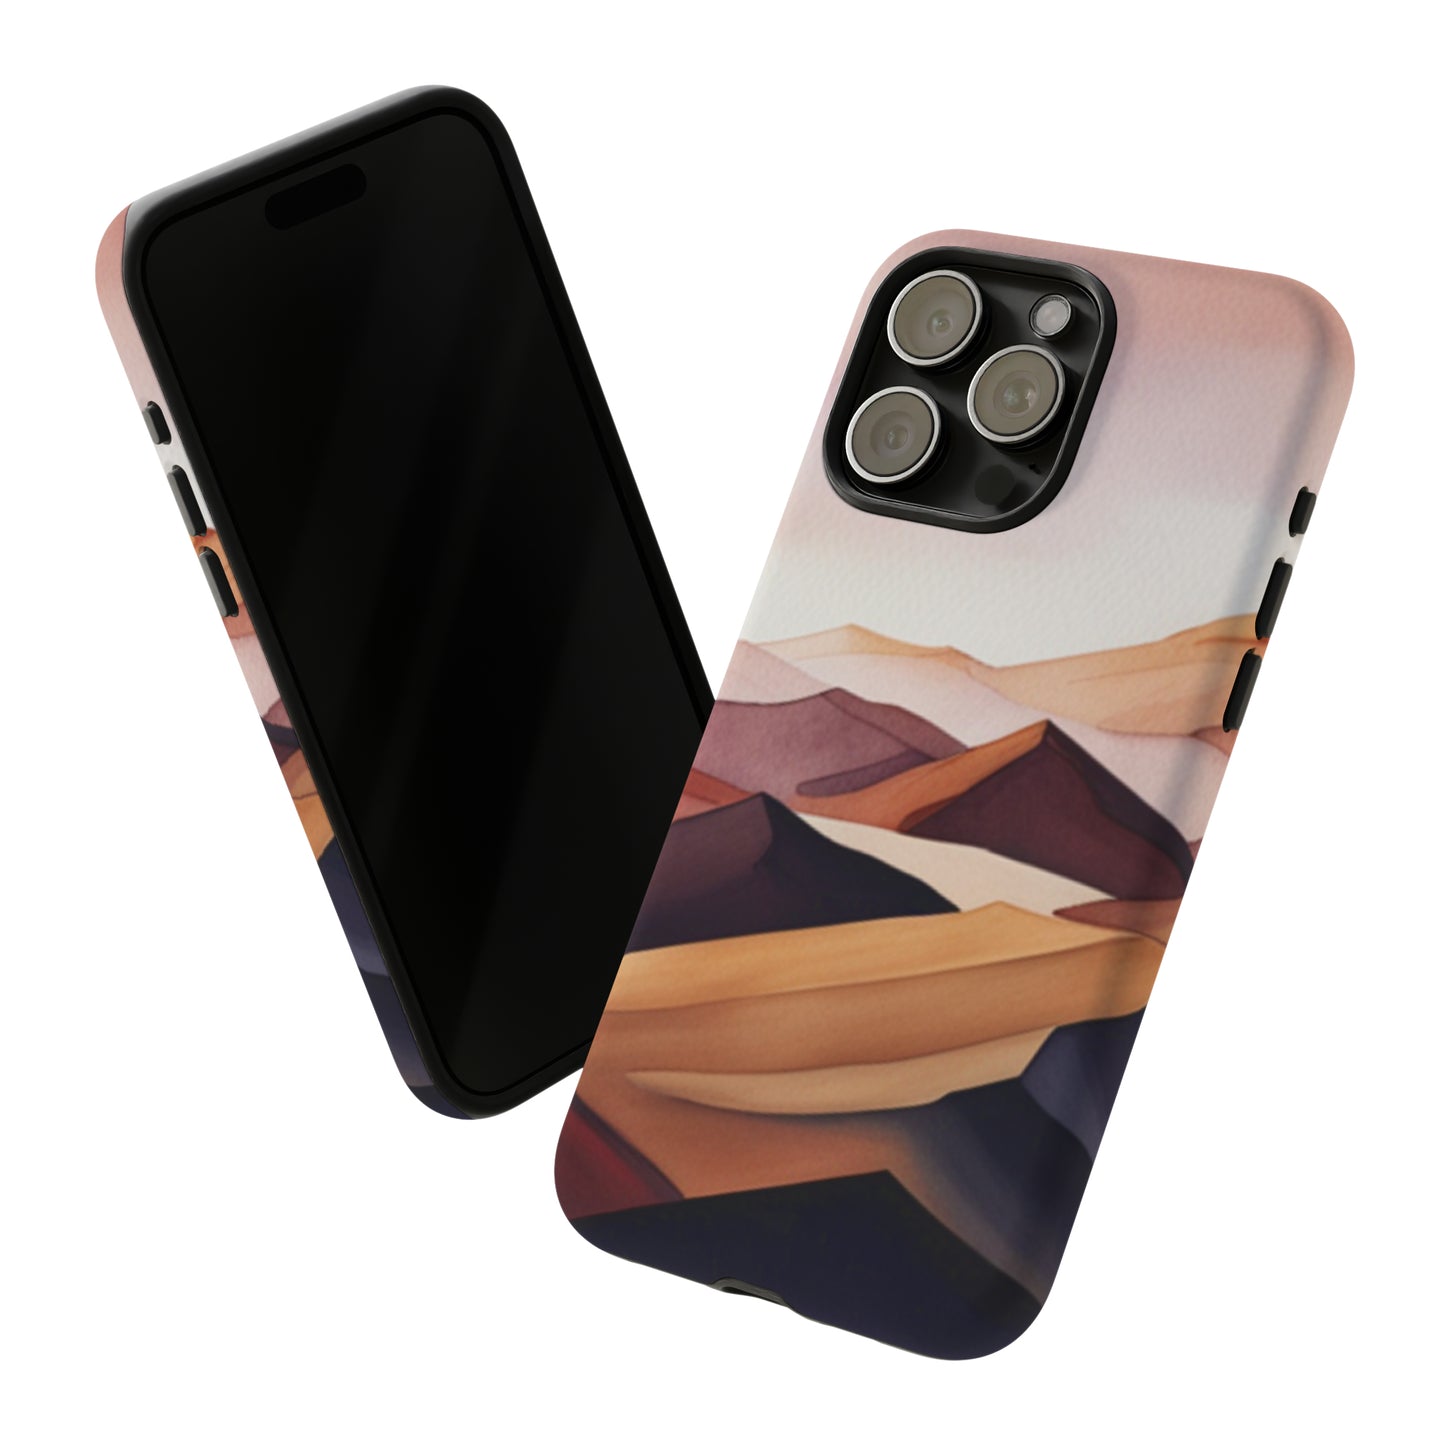 Tough Cases for Apple iPhone, Samsung Galaxy, and Google Pixel devices with premium-quality custom protective phone cases.